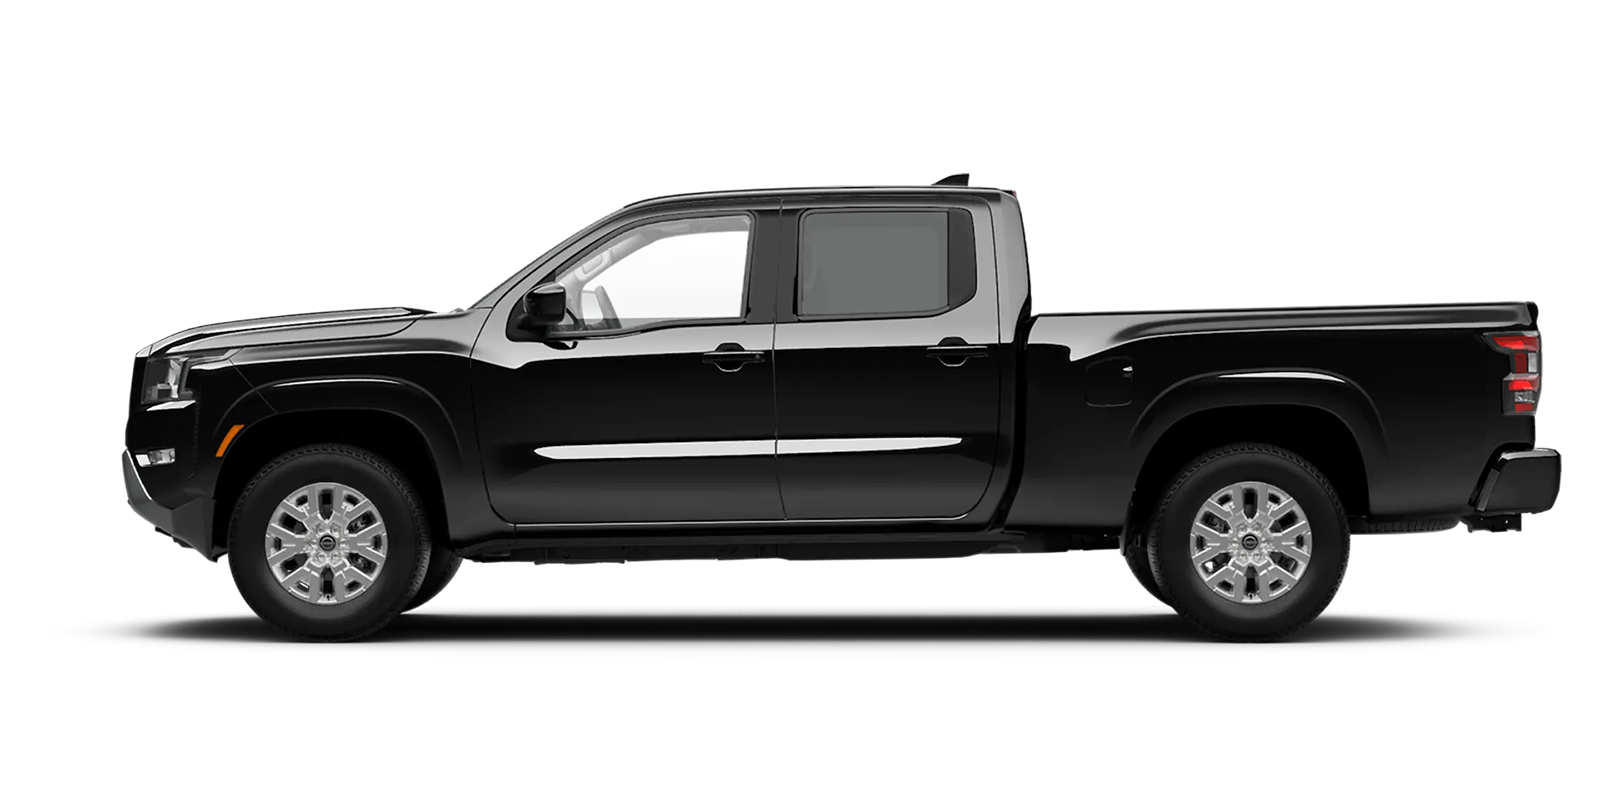 2022 Frontier Crew Cab Long Bed SV 4x4 in Super Black | Neil Huffman Nissan of Frankfort in Frankfort KY